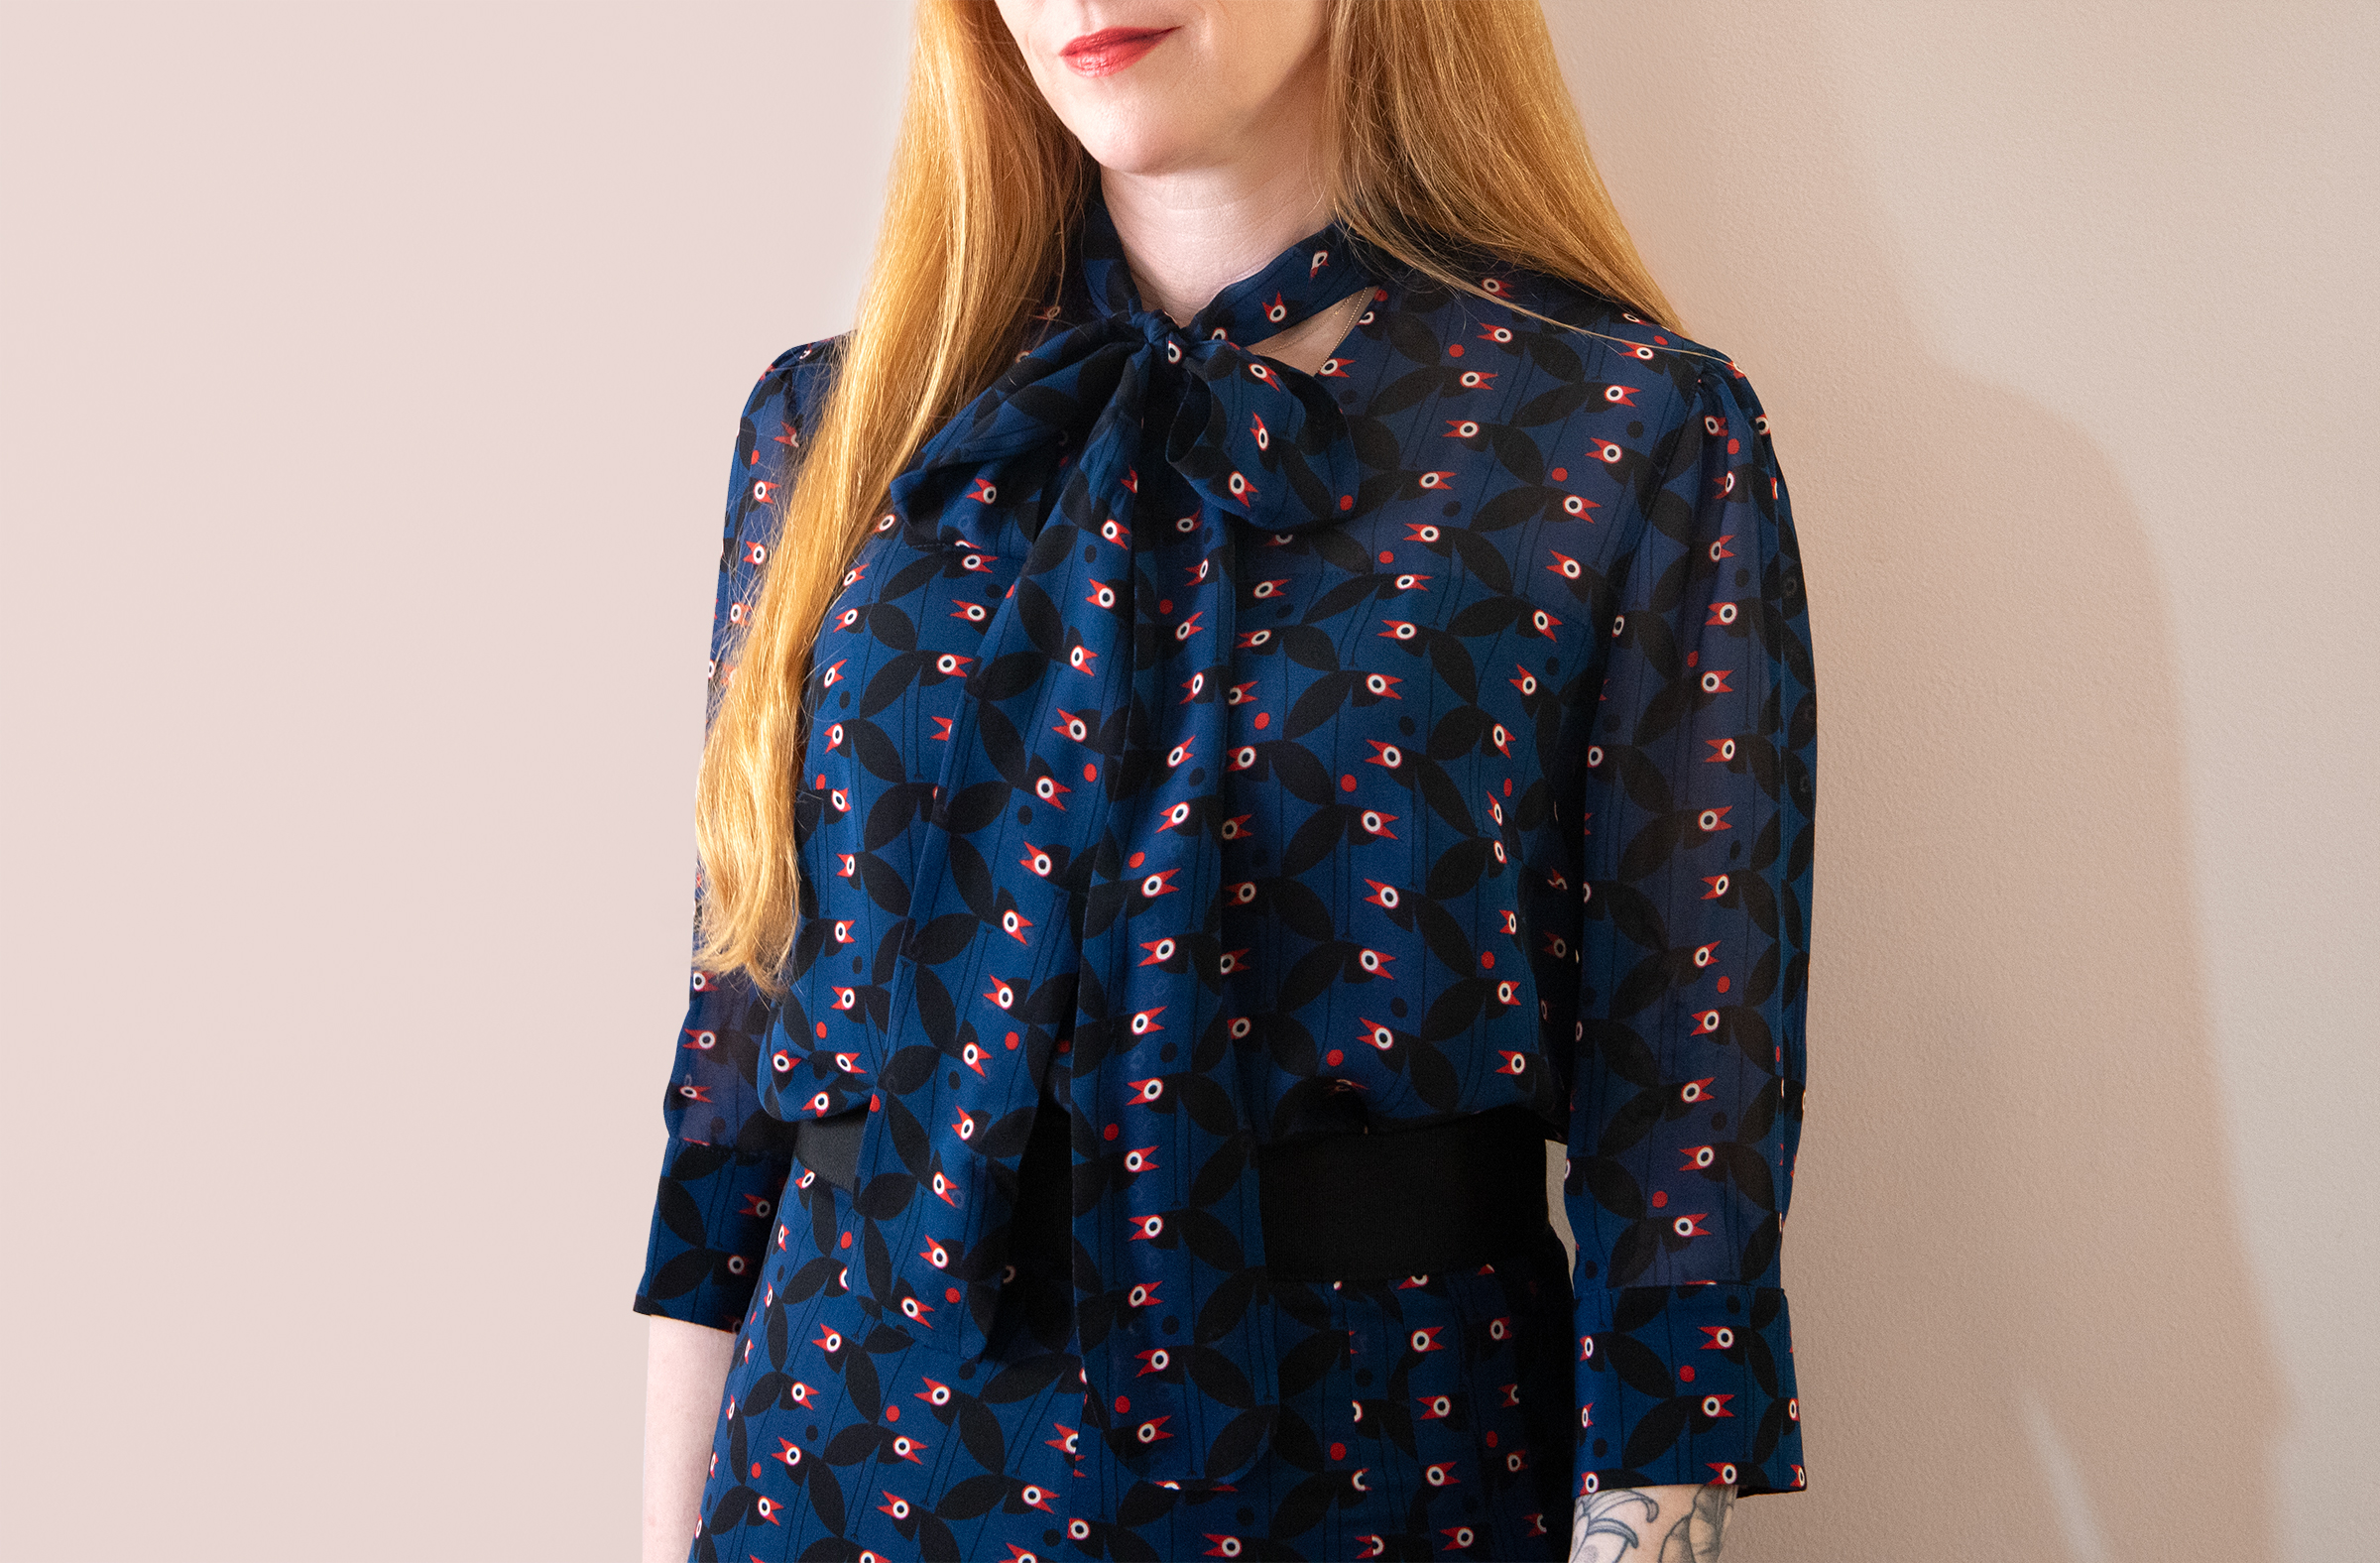 red haired woman with red lipstick wearing a pussy bow blouse and skirt in navy blue with crows pattern in black, white